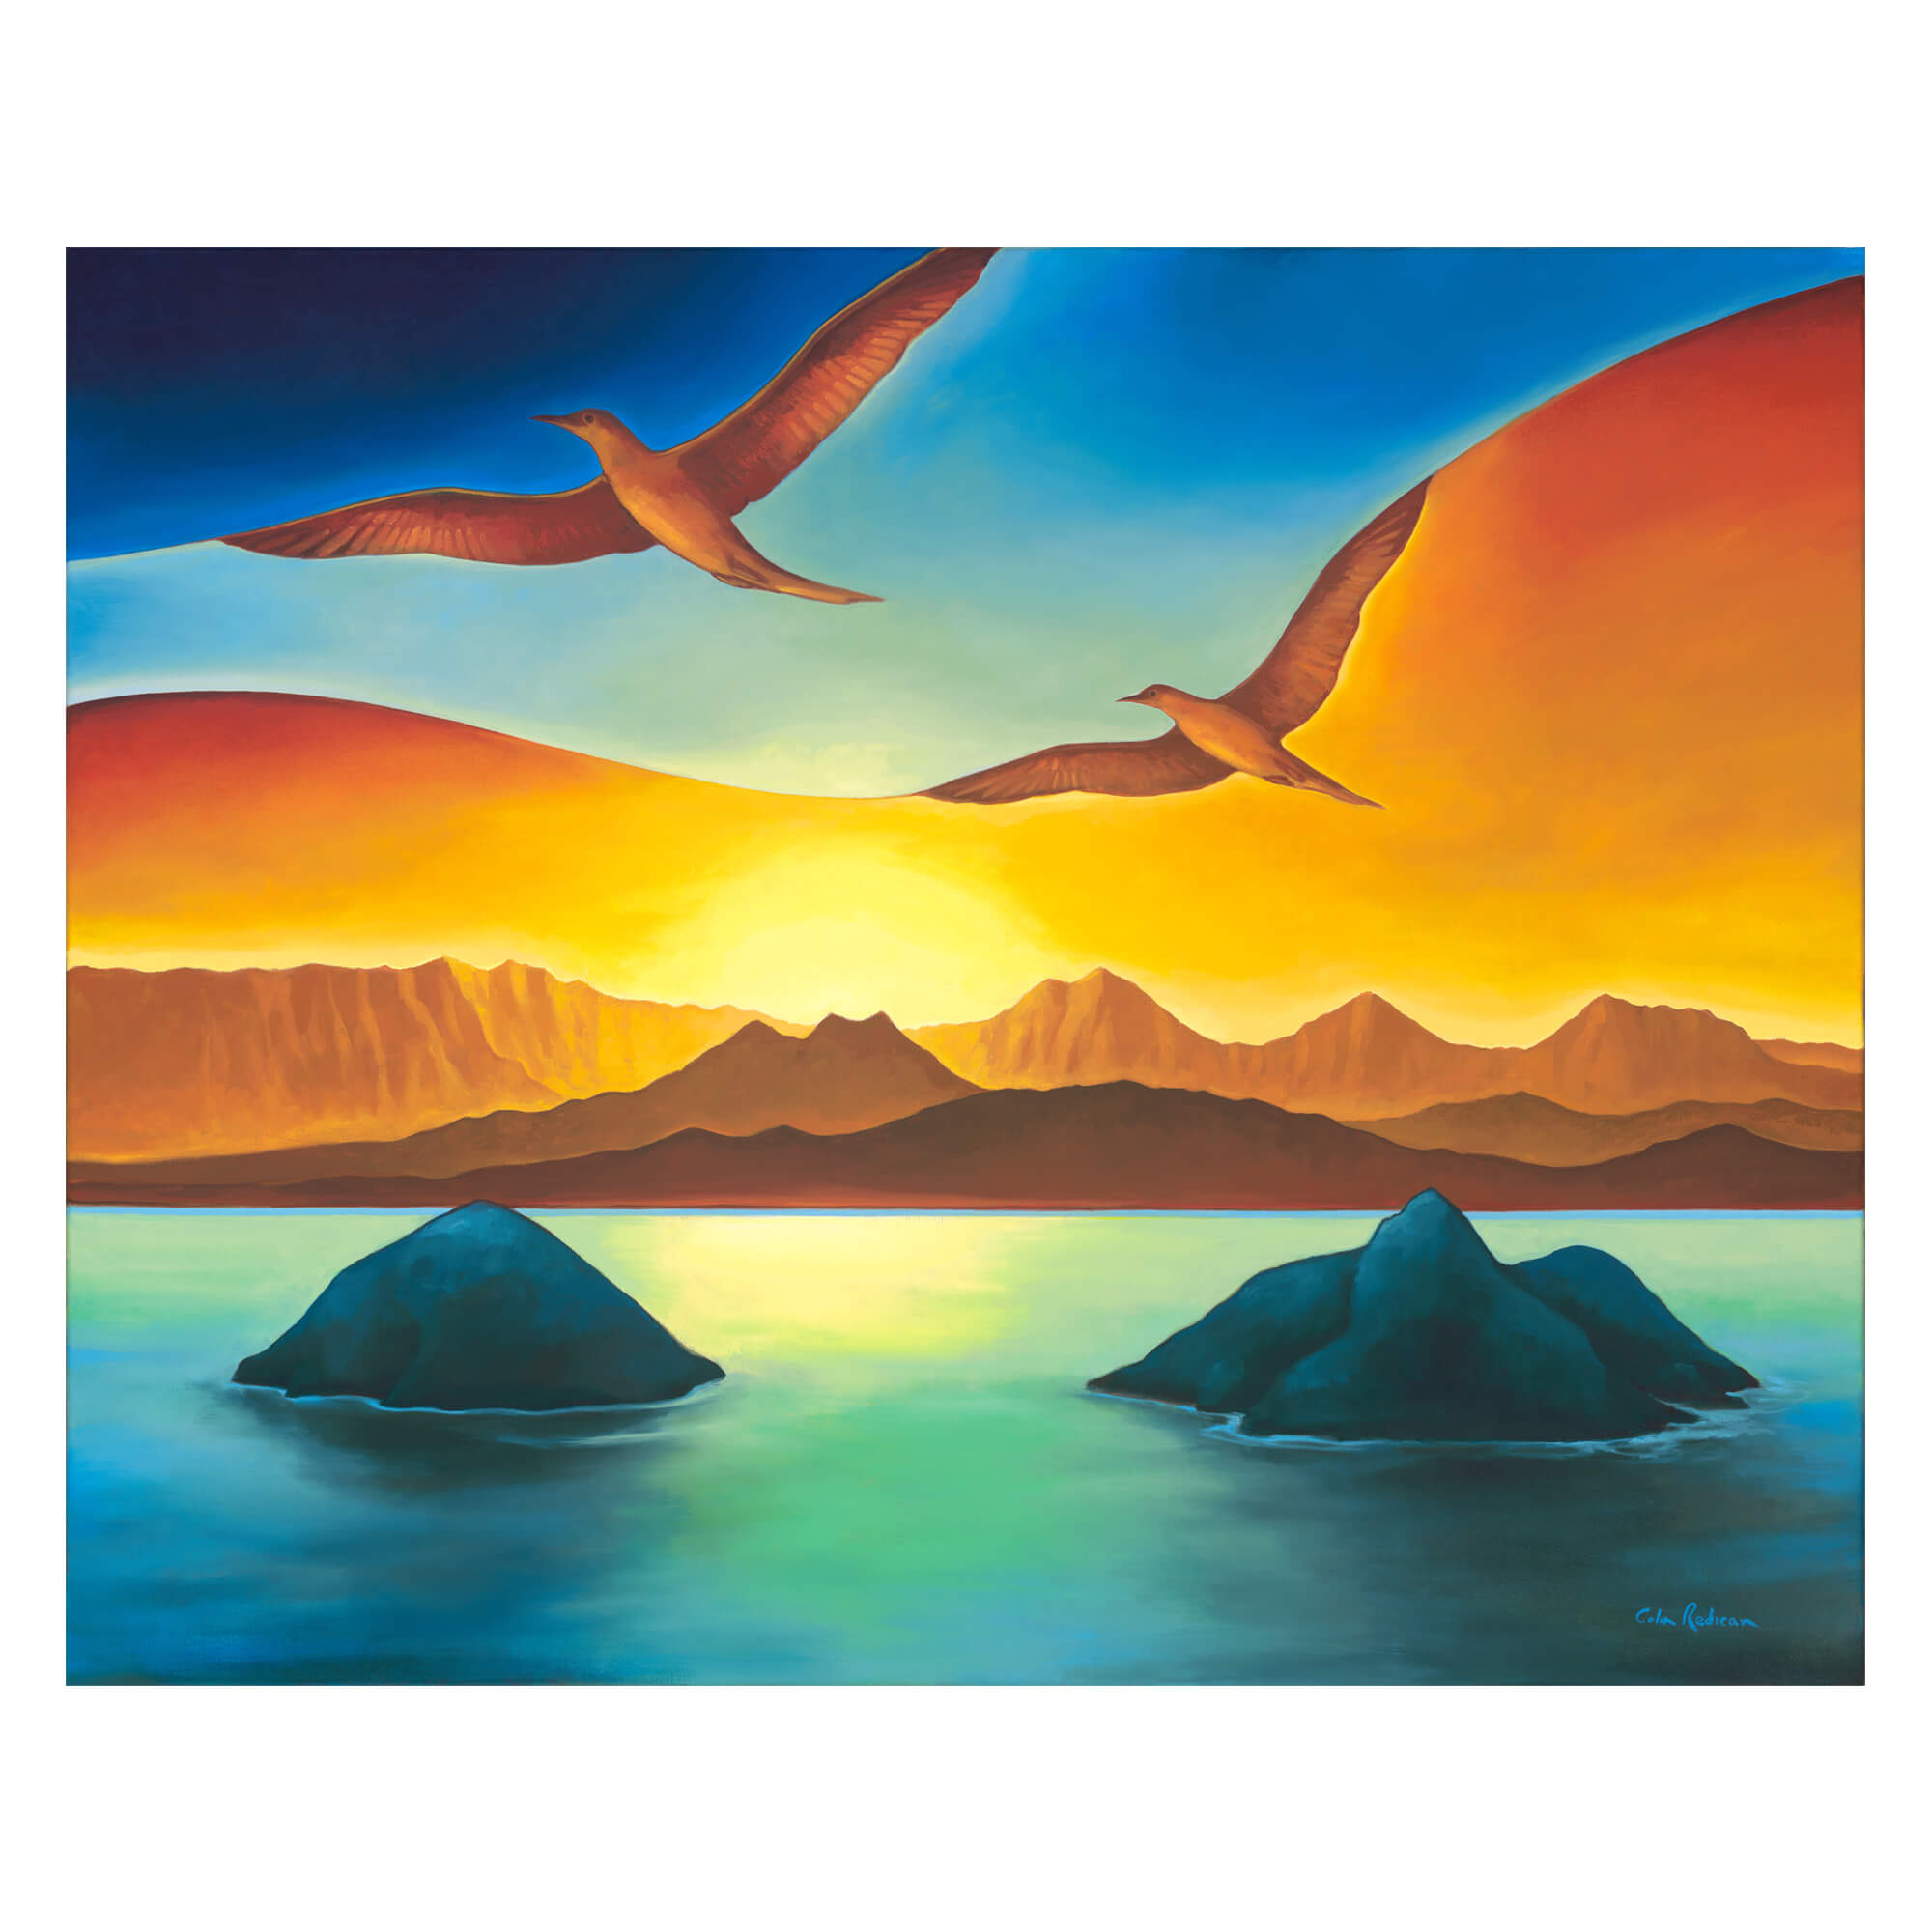 A bird's eye view of the sunset by Hawaii artist Colin Redican